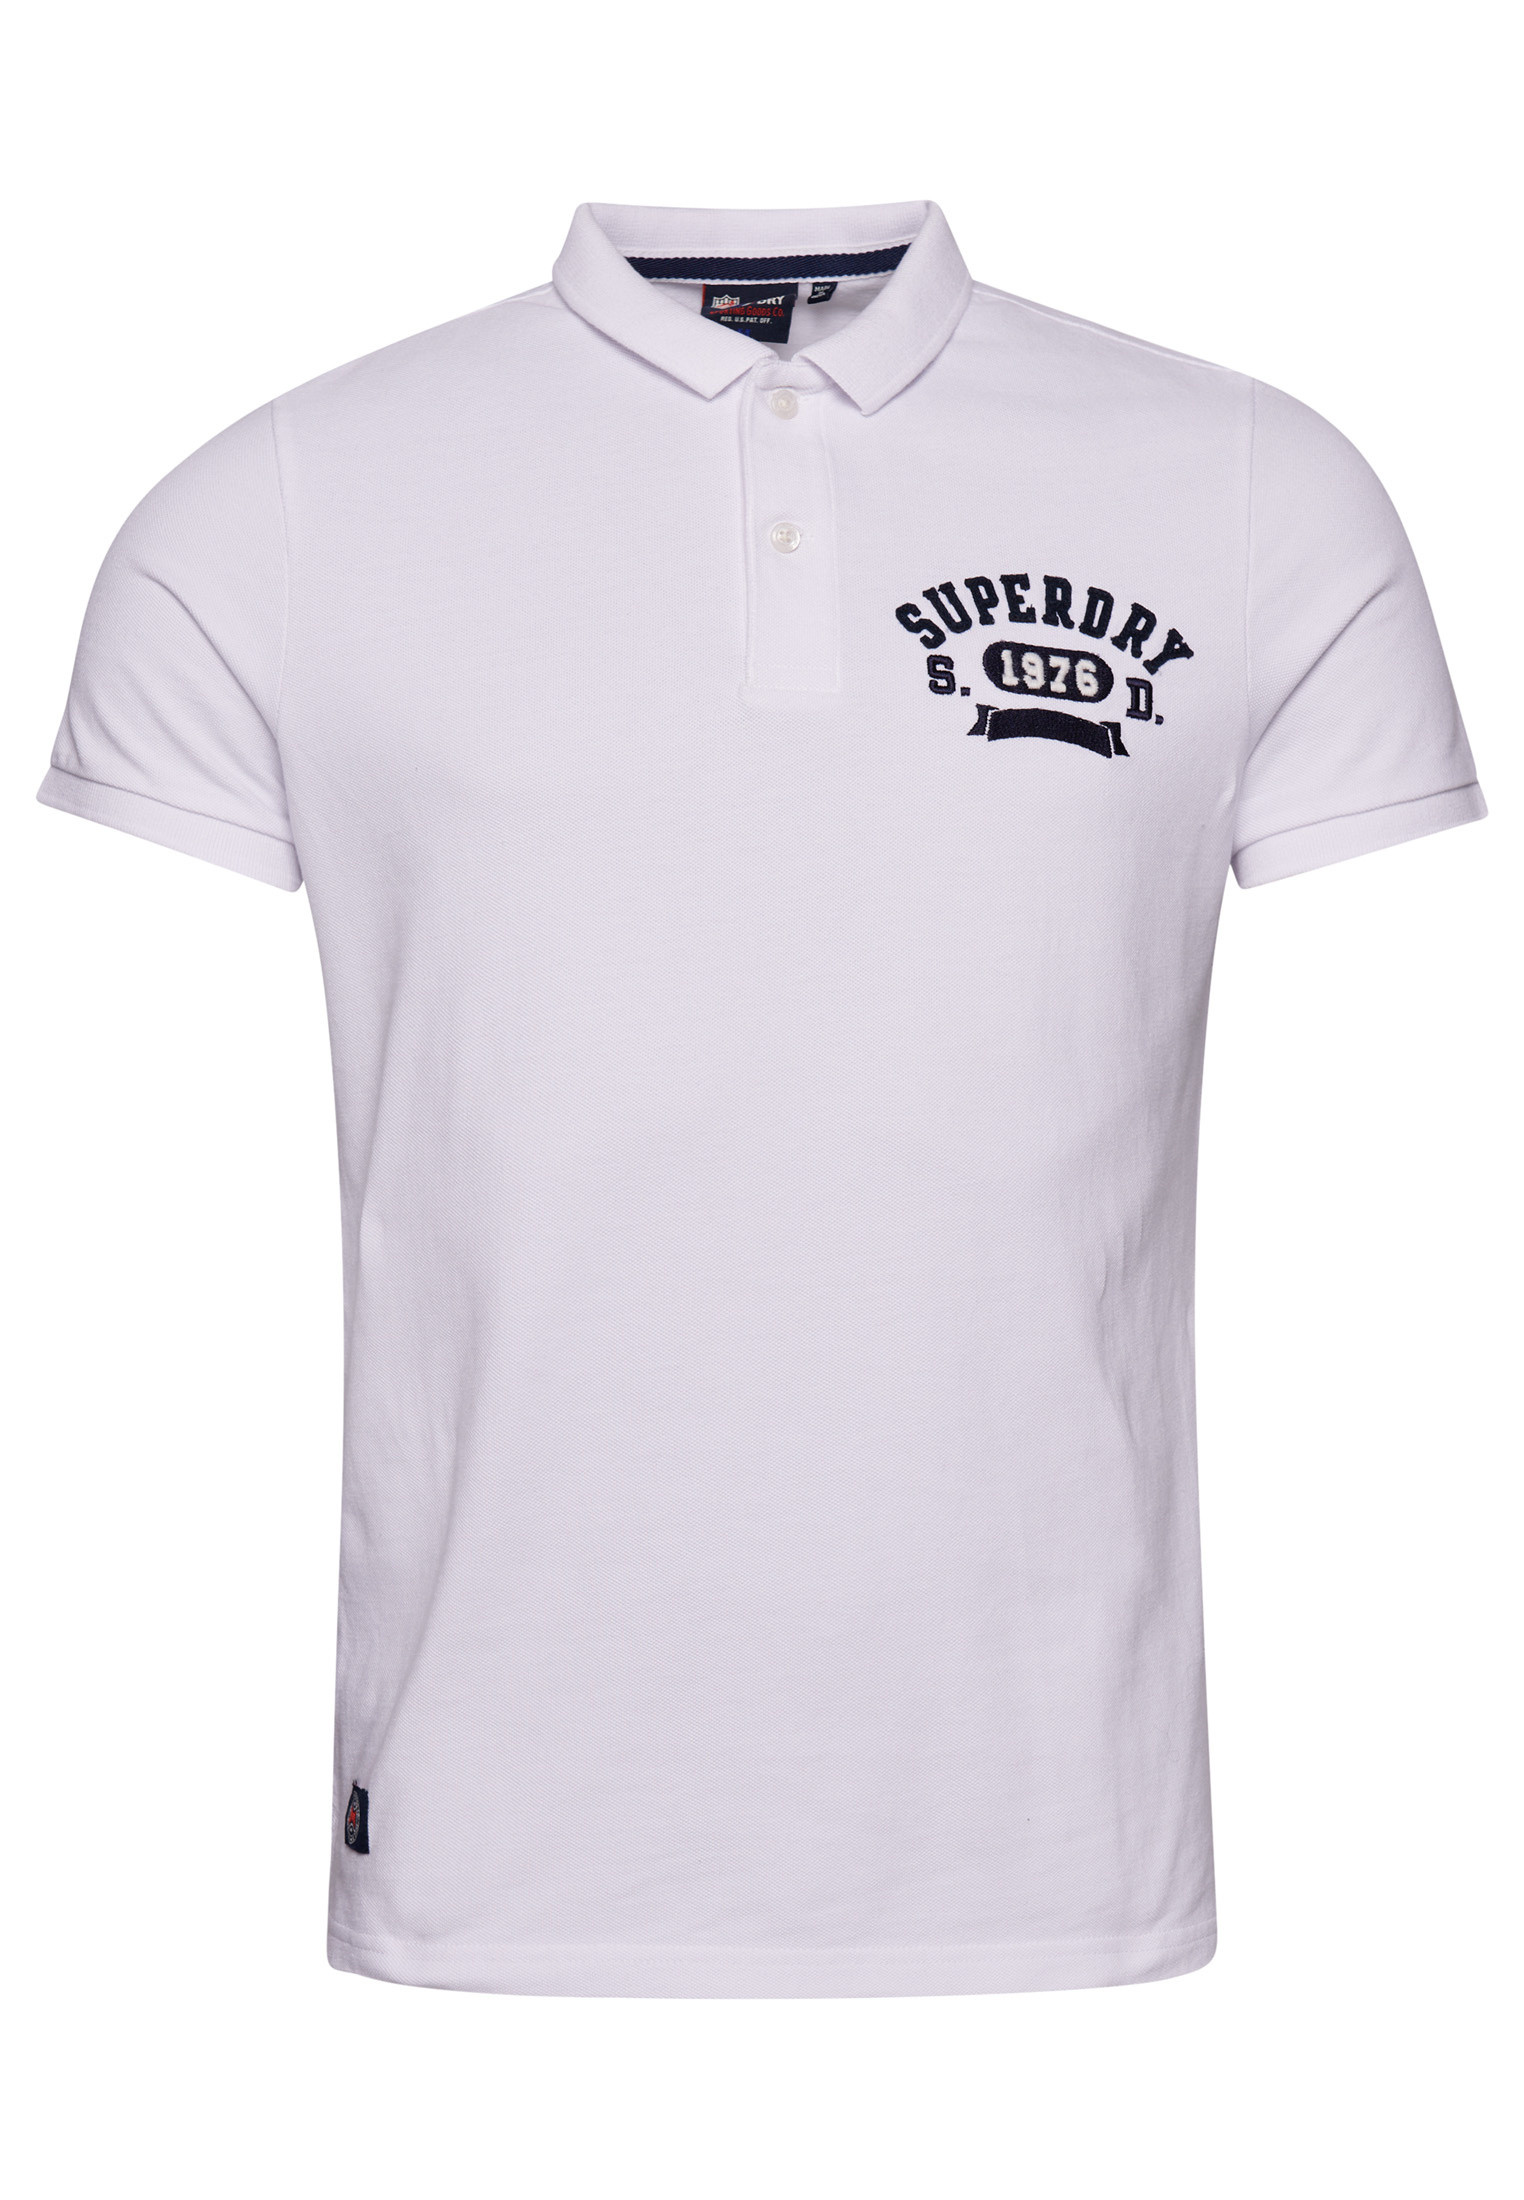 Superdry - Polo in cotone piquet con logo, Bianco, large image number 0